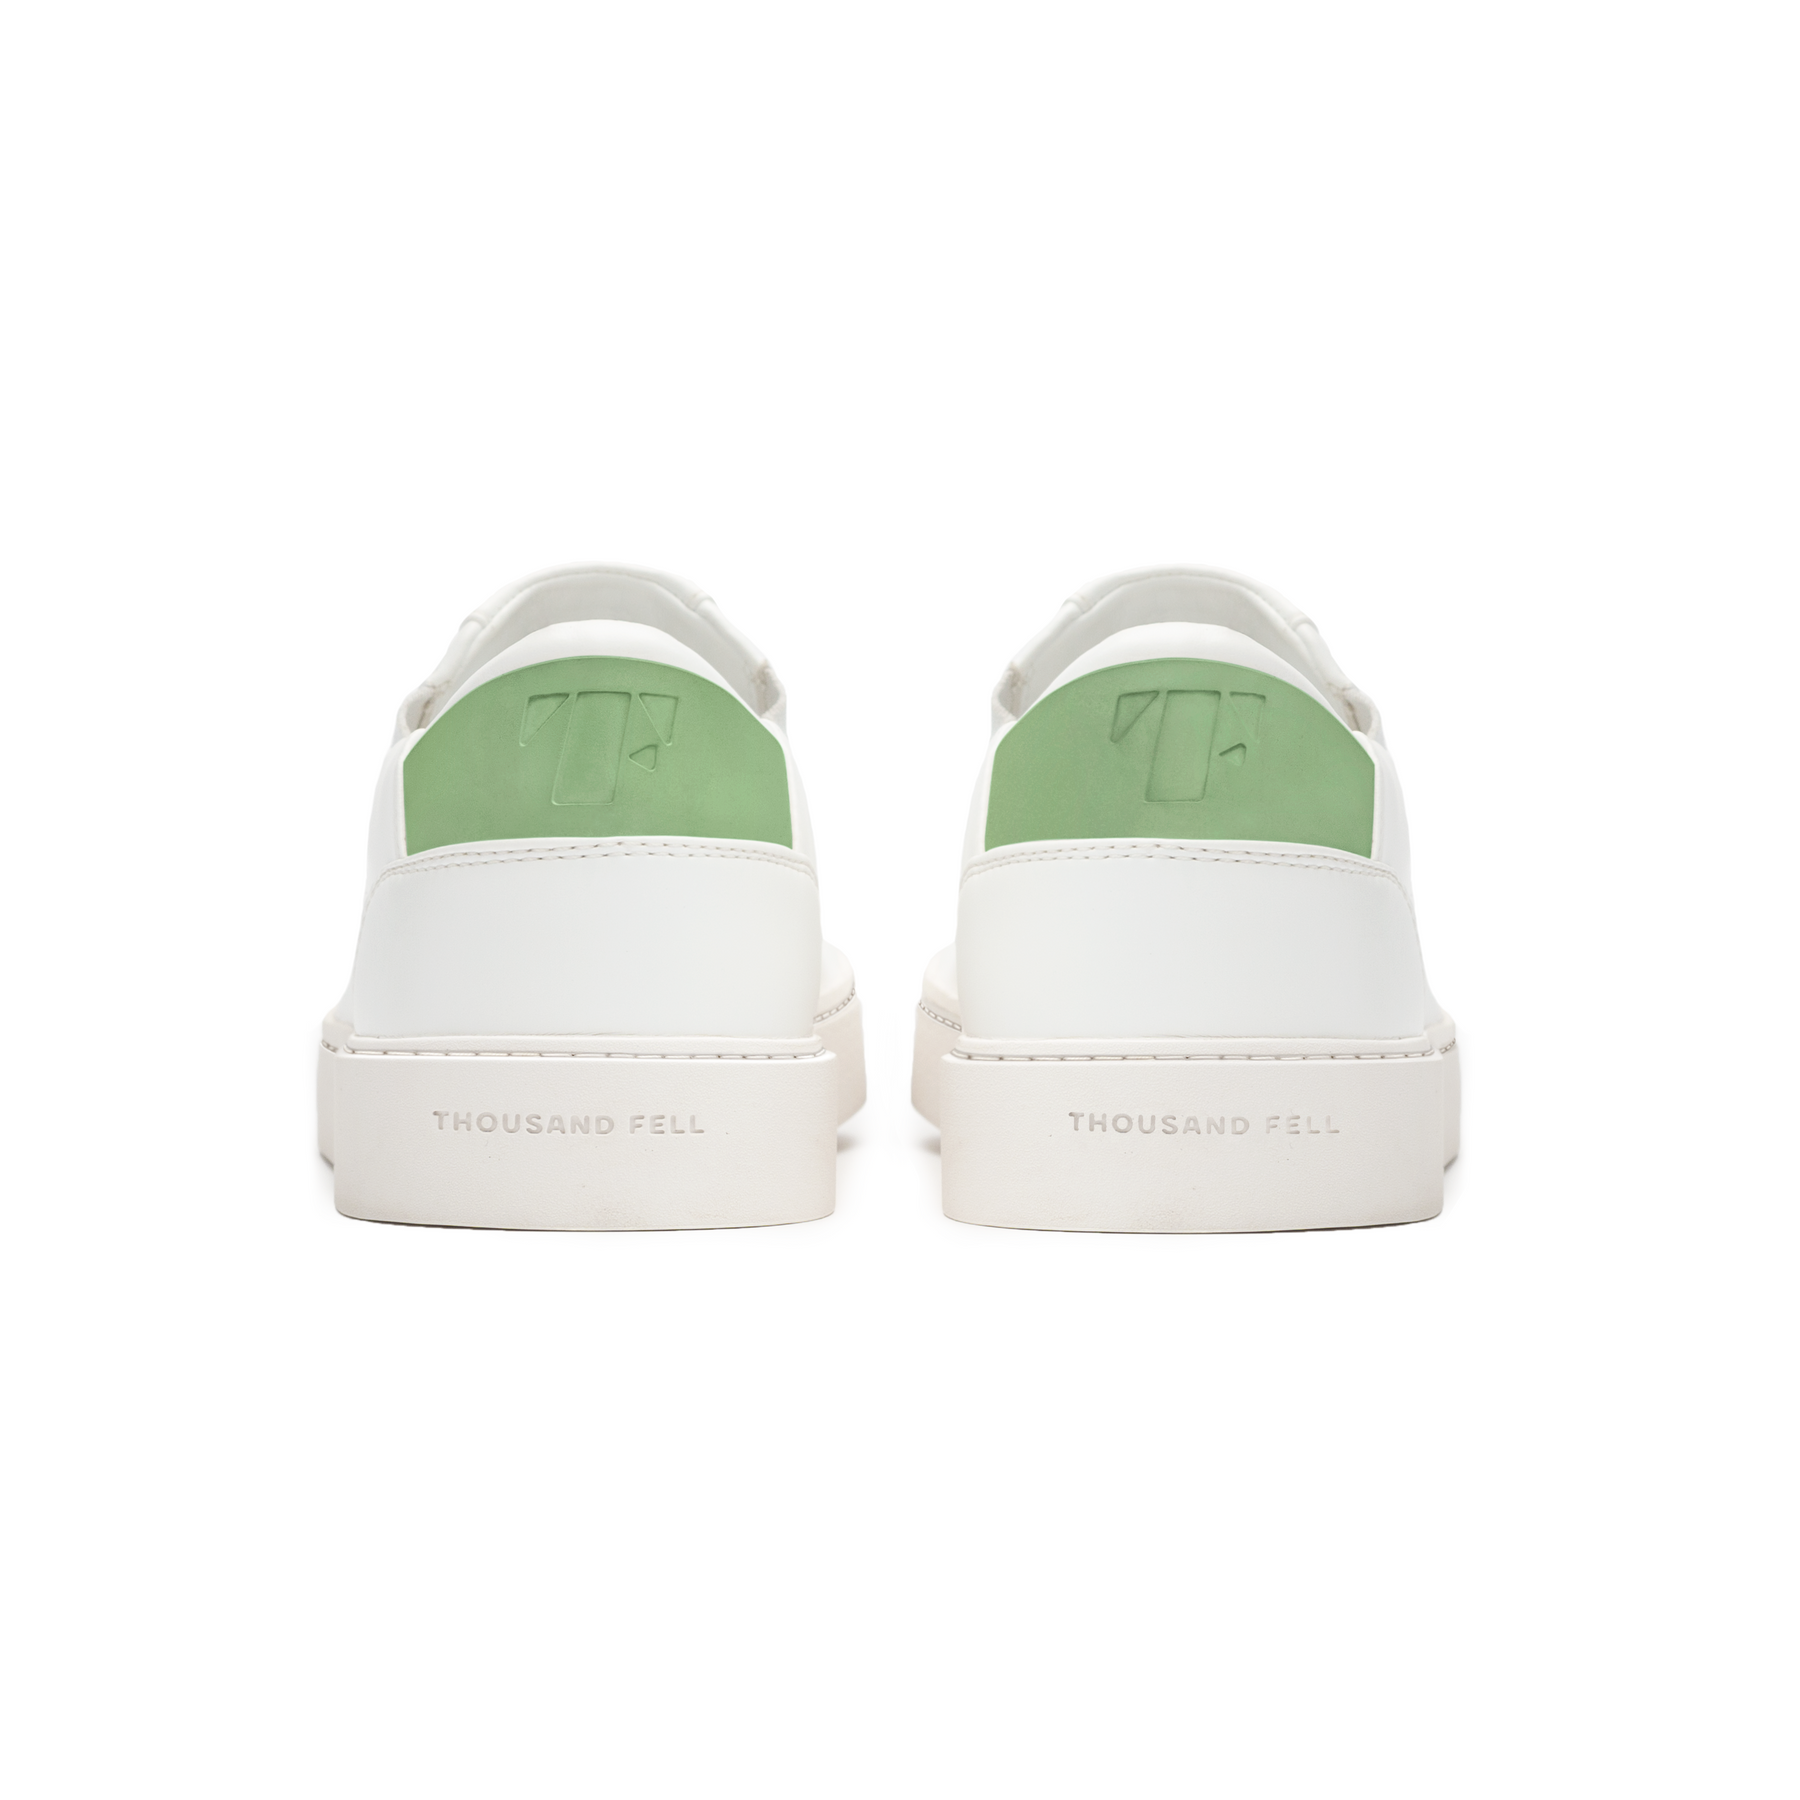 back view of sustainable slip on sneakers in white and green